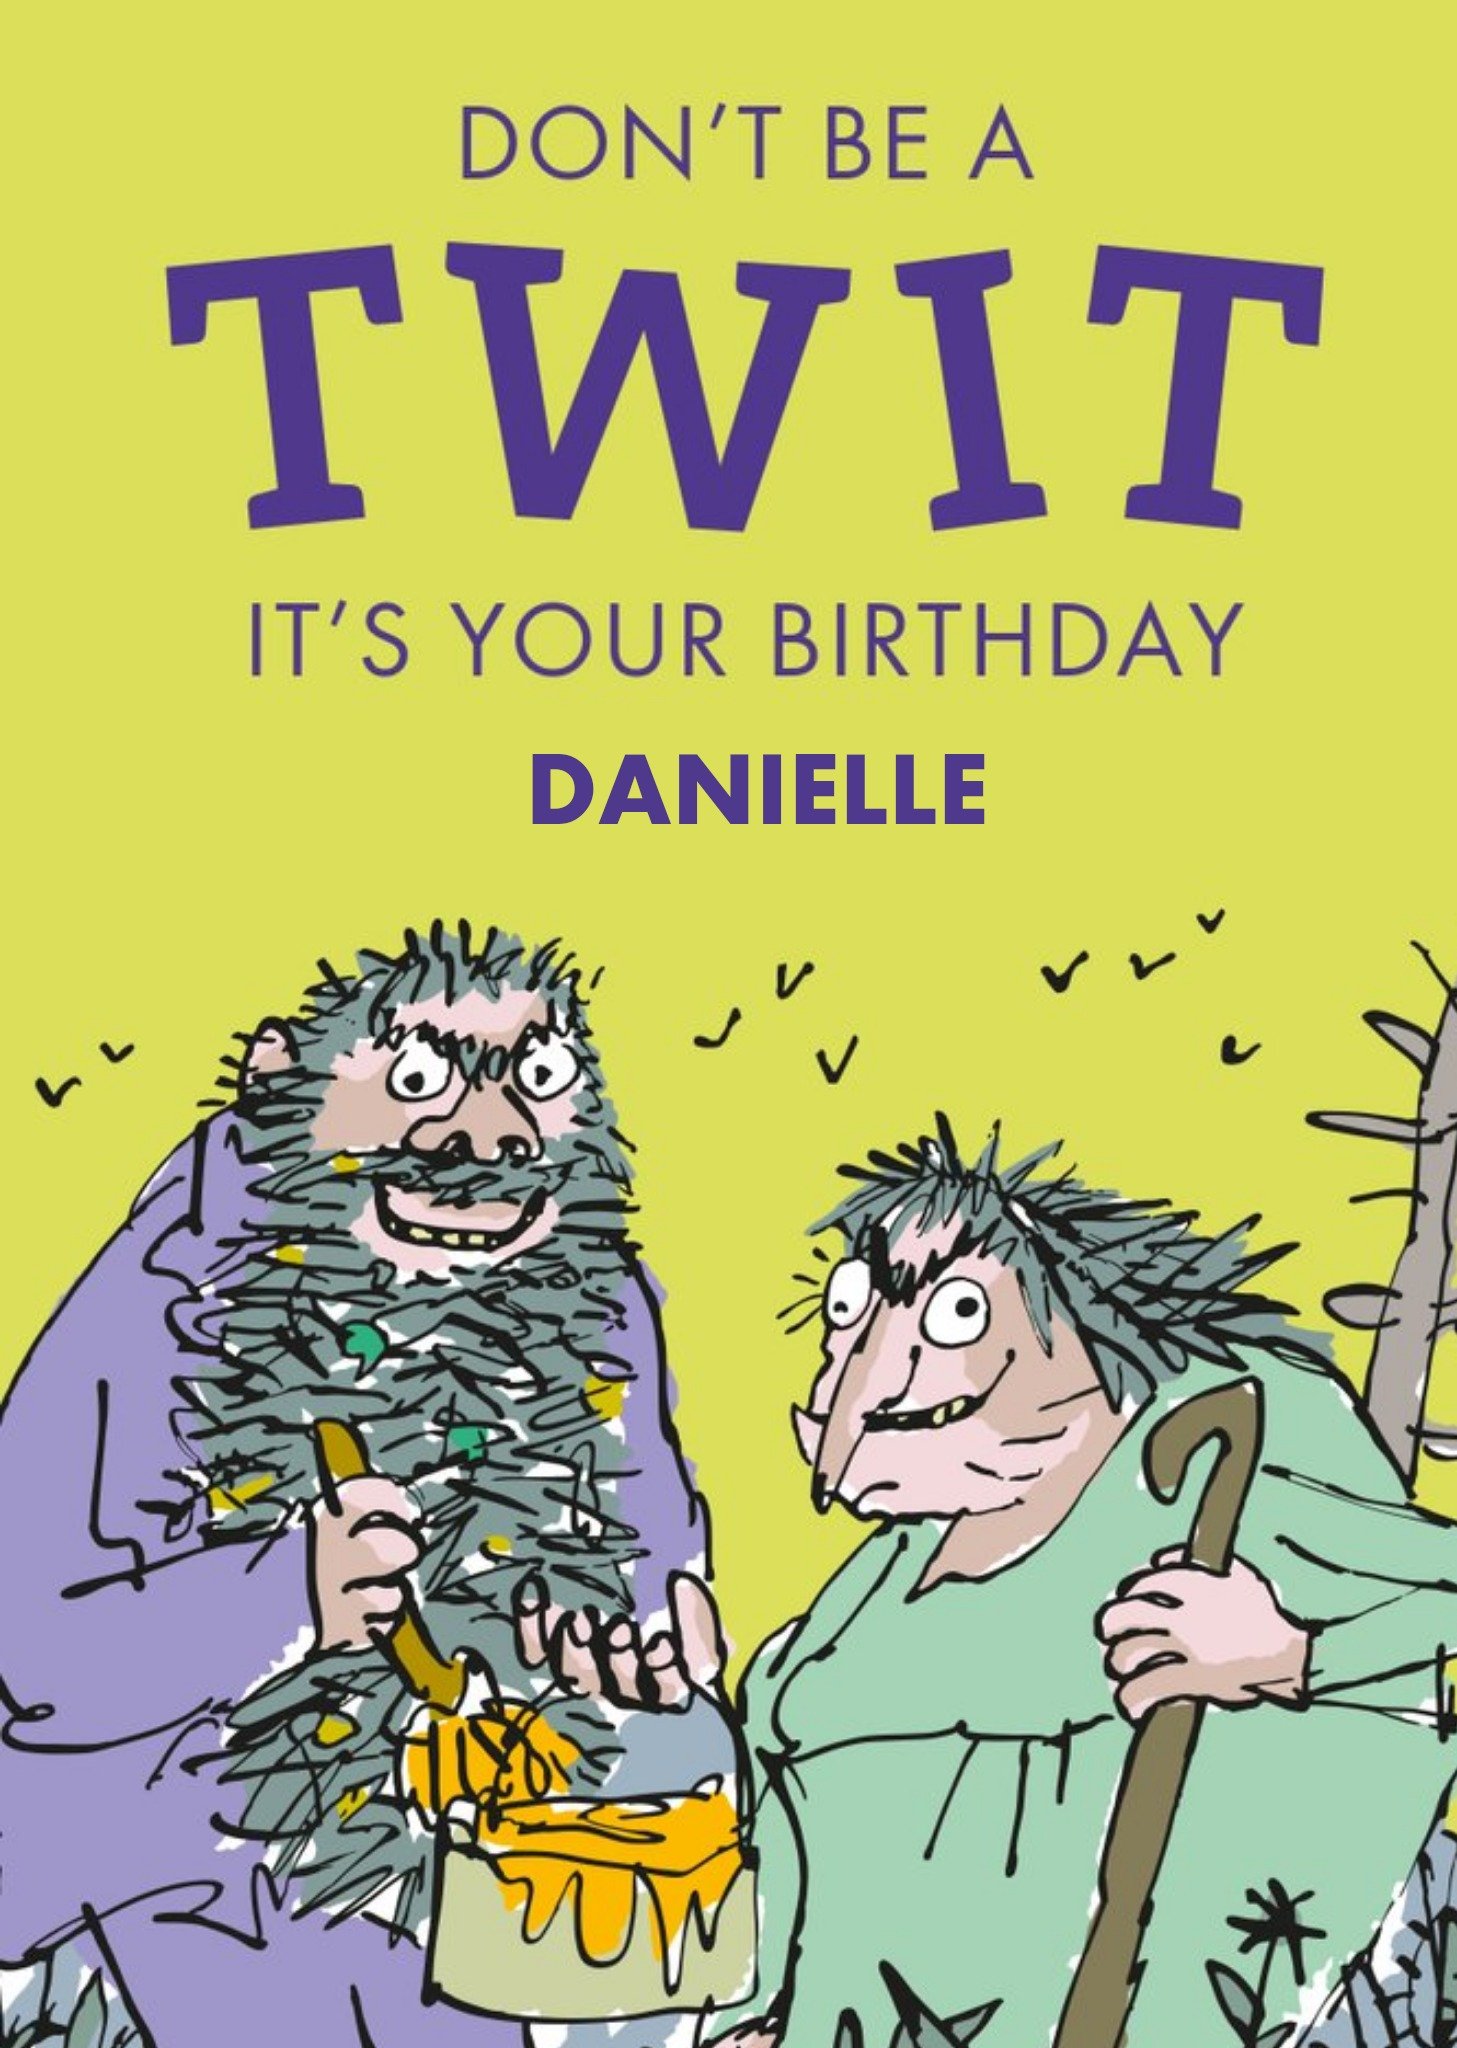 Moonpig Roald Dahl The Twits Don't Be A Twit It's Your Birthday Card, Large